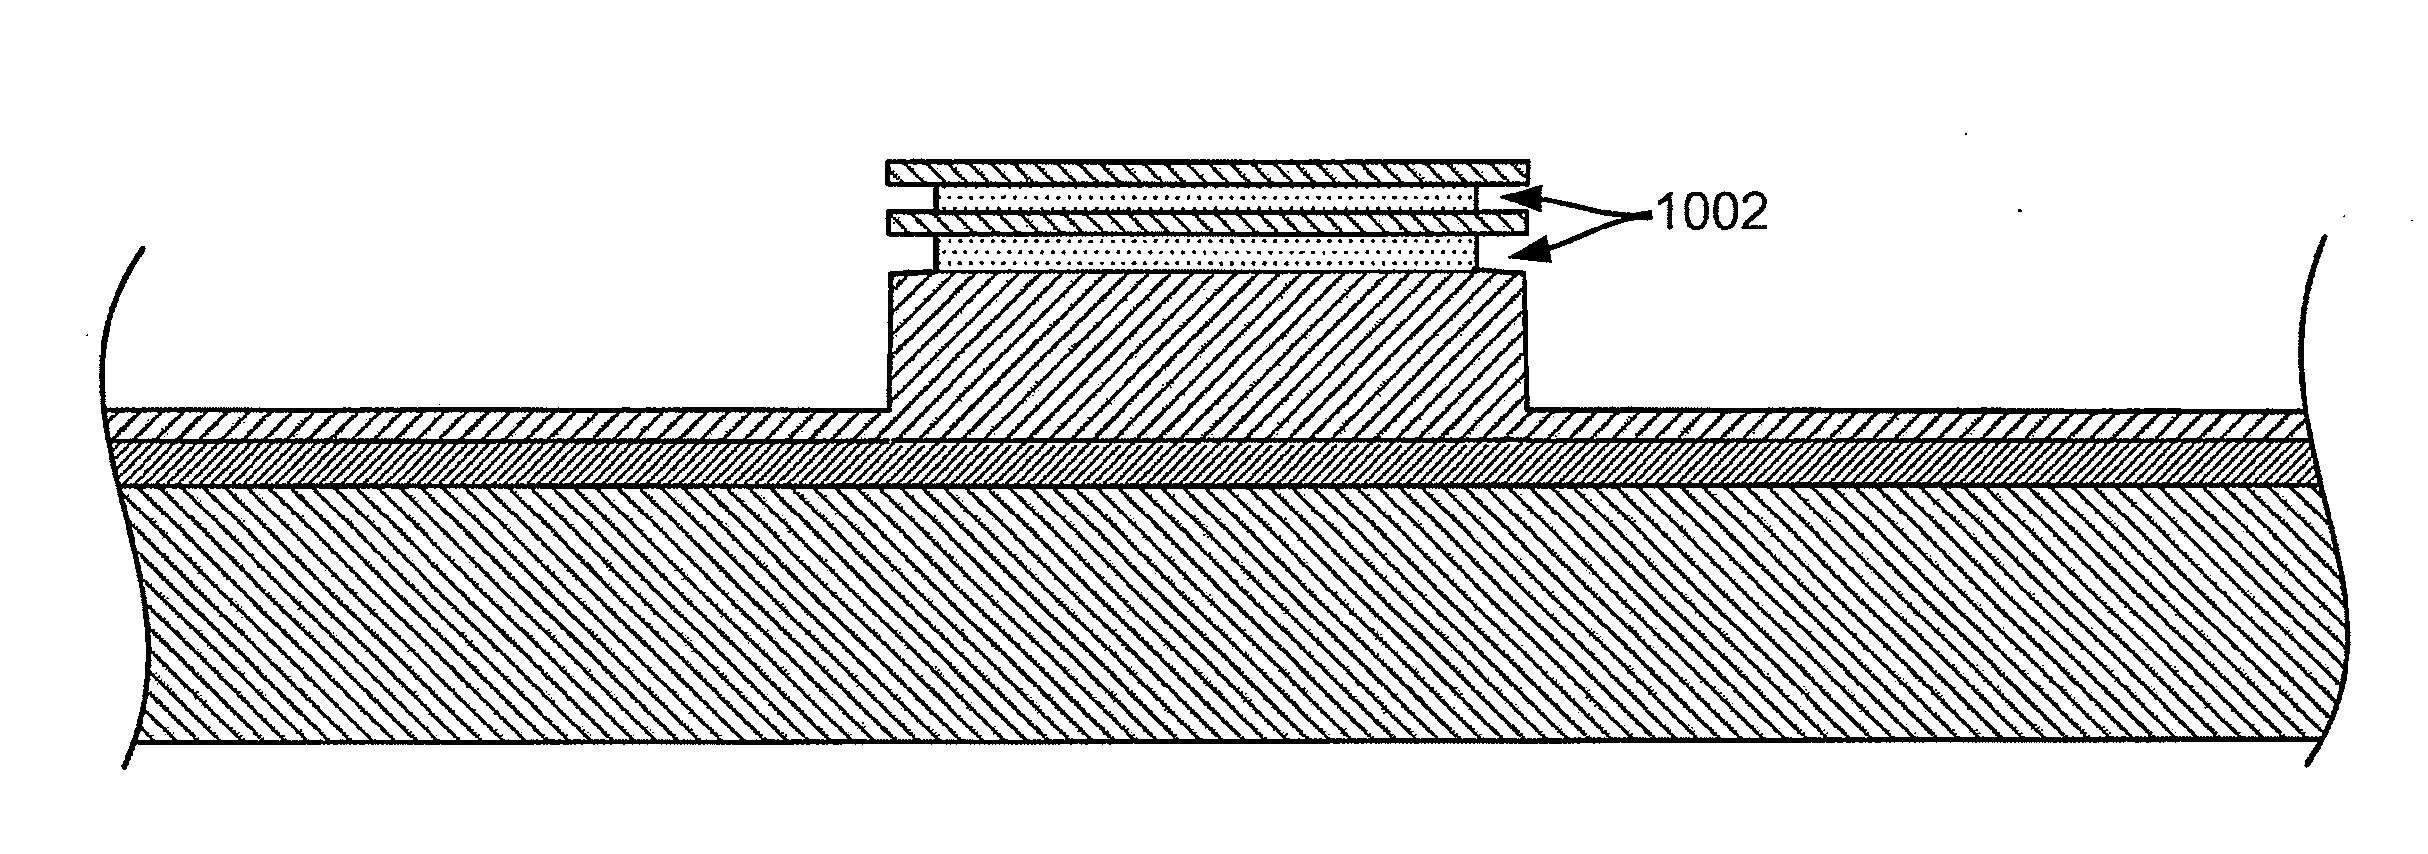 Self-Aligned Multi-Dielectric-Layer Lift Off Process for Laser Diode Stripes